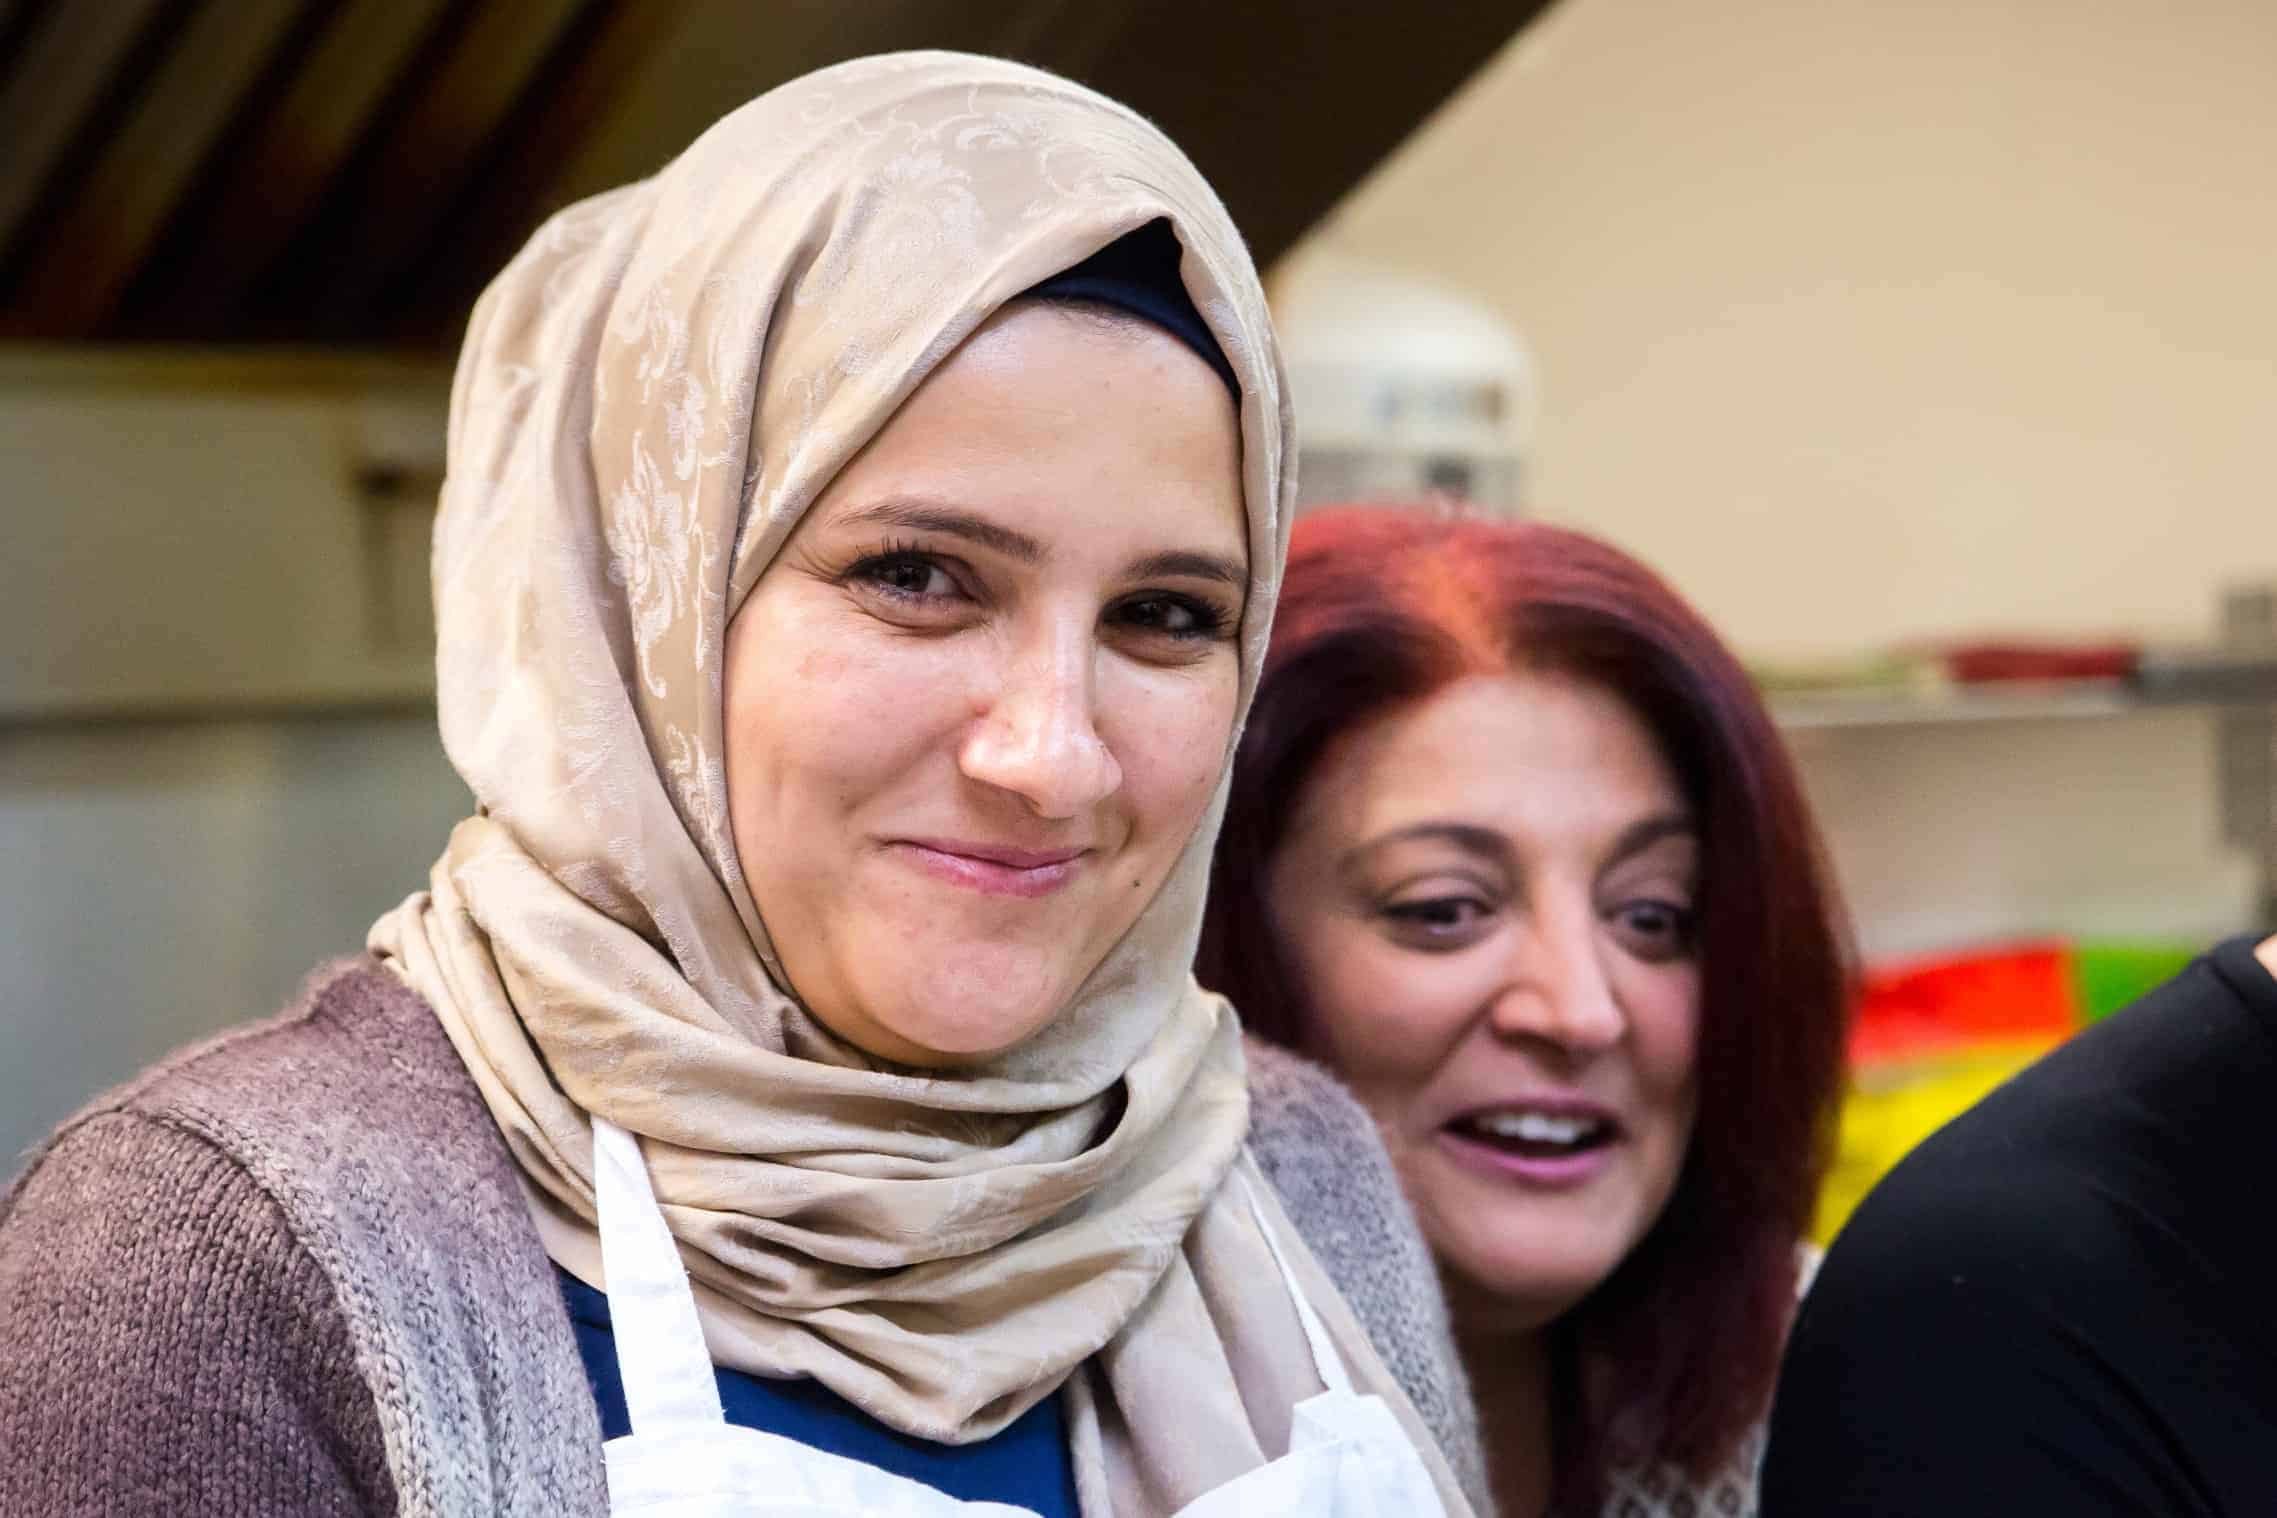 On the right, Sonia Habashy, community facilitator with EMCN, laughs with Tahany (left), who emigrated from Syria with her three children 11 months ago. Tahany’s husband died in the war and she lives with her sister and her children in Edmonton.| Rebecca Lippiatt